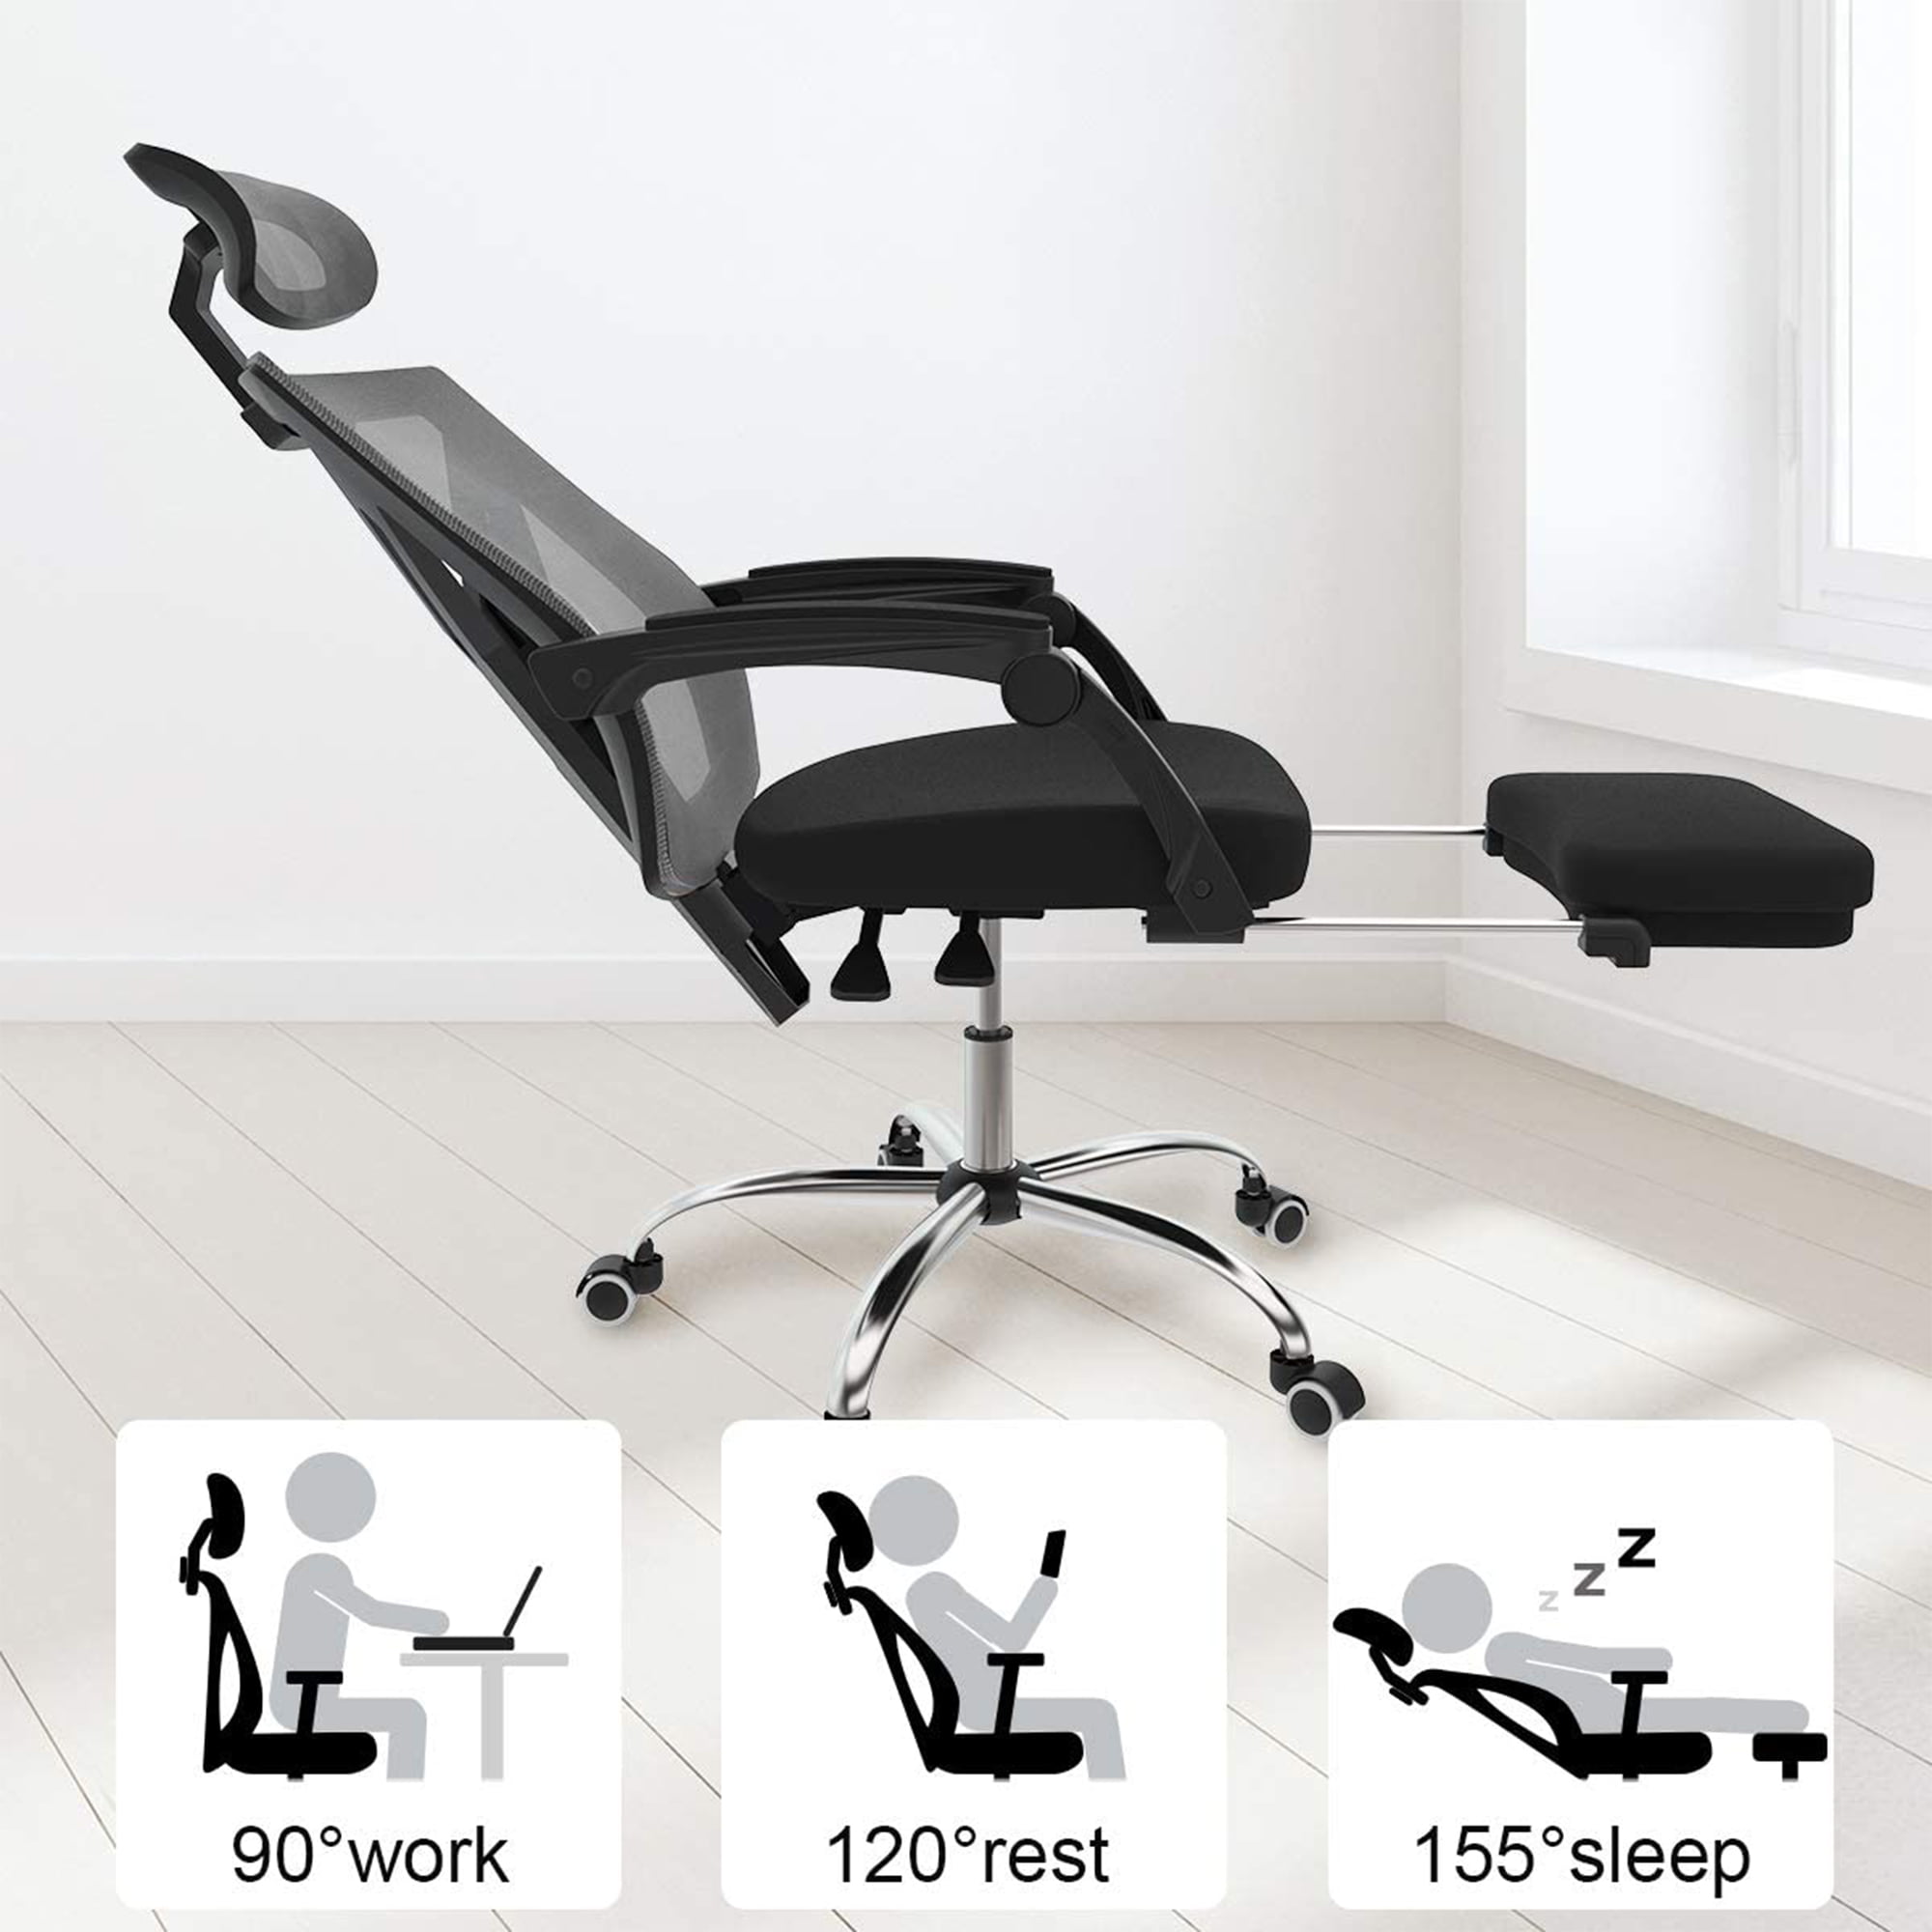 Hbada Ergonomic Office Recliner Chair - High-Back Desk Chair Racing Style  with Lumbar Support - Height Adjustable Seat, Headrest- Breathable Mesh  Back 